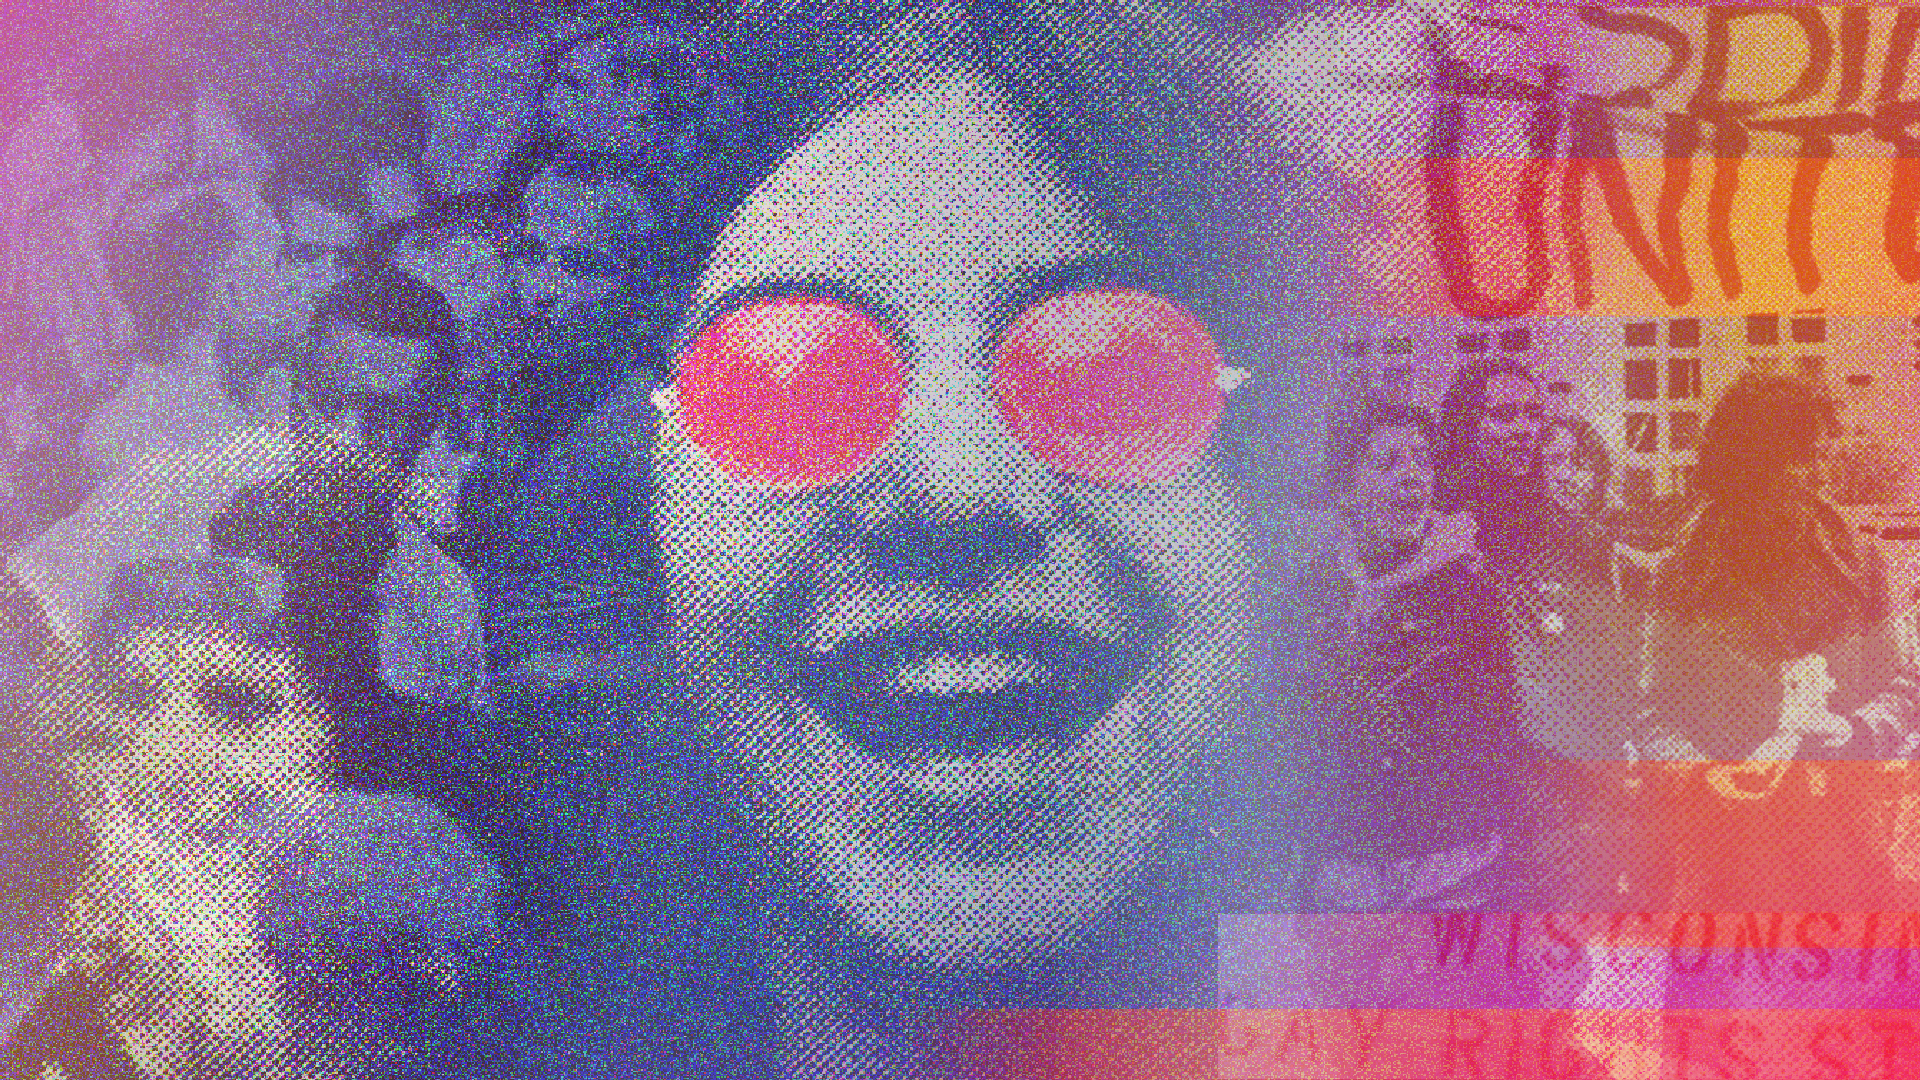 Overlay of a person with red-tinted sunglasses, amidst a crowd, with the phrases "LESBIANS UNITE!" and "WISCONSIN PRIDE" visible.